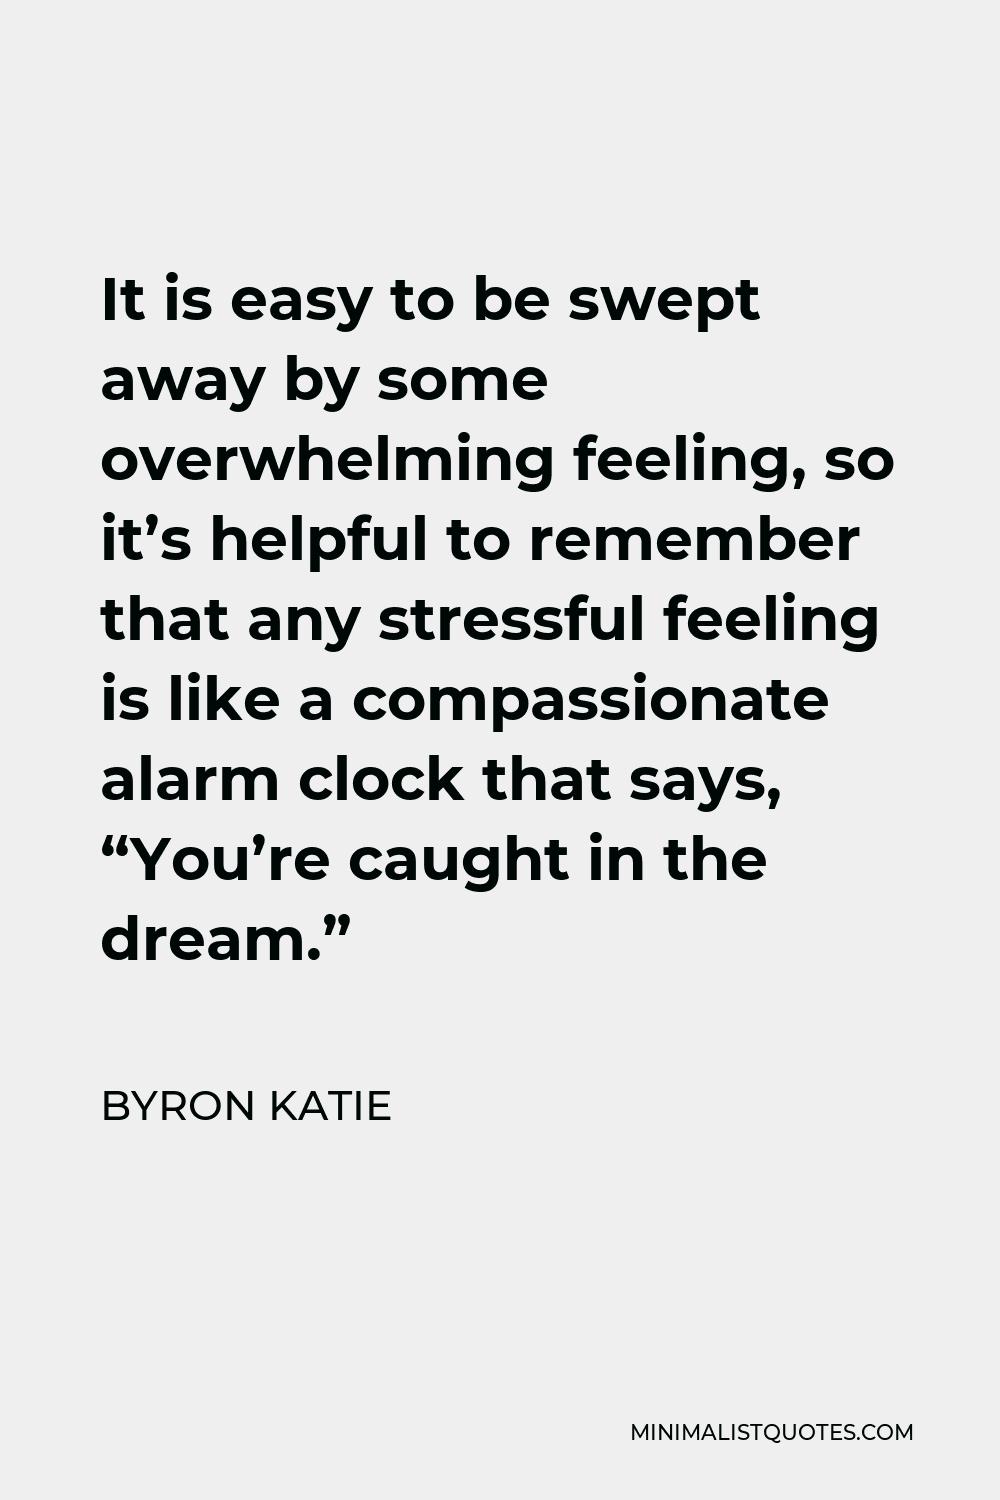 Byron Katie Quote - It is easy to be swept away by some overwhelming feeling, so it’s helpful to remember that any stressful feeling is like a compassionate alarm clock that says, “You’re caught in the dream.”